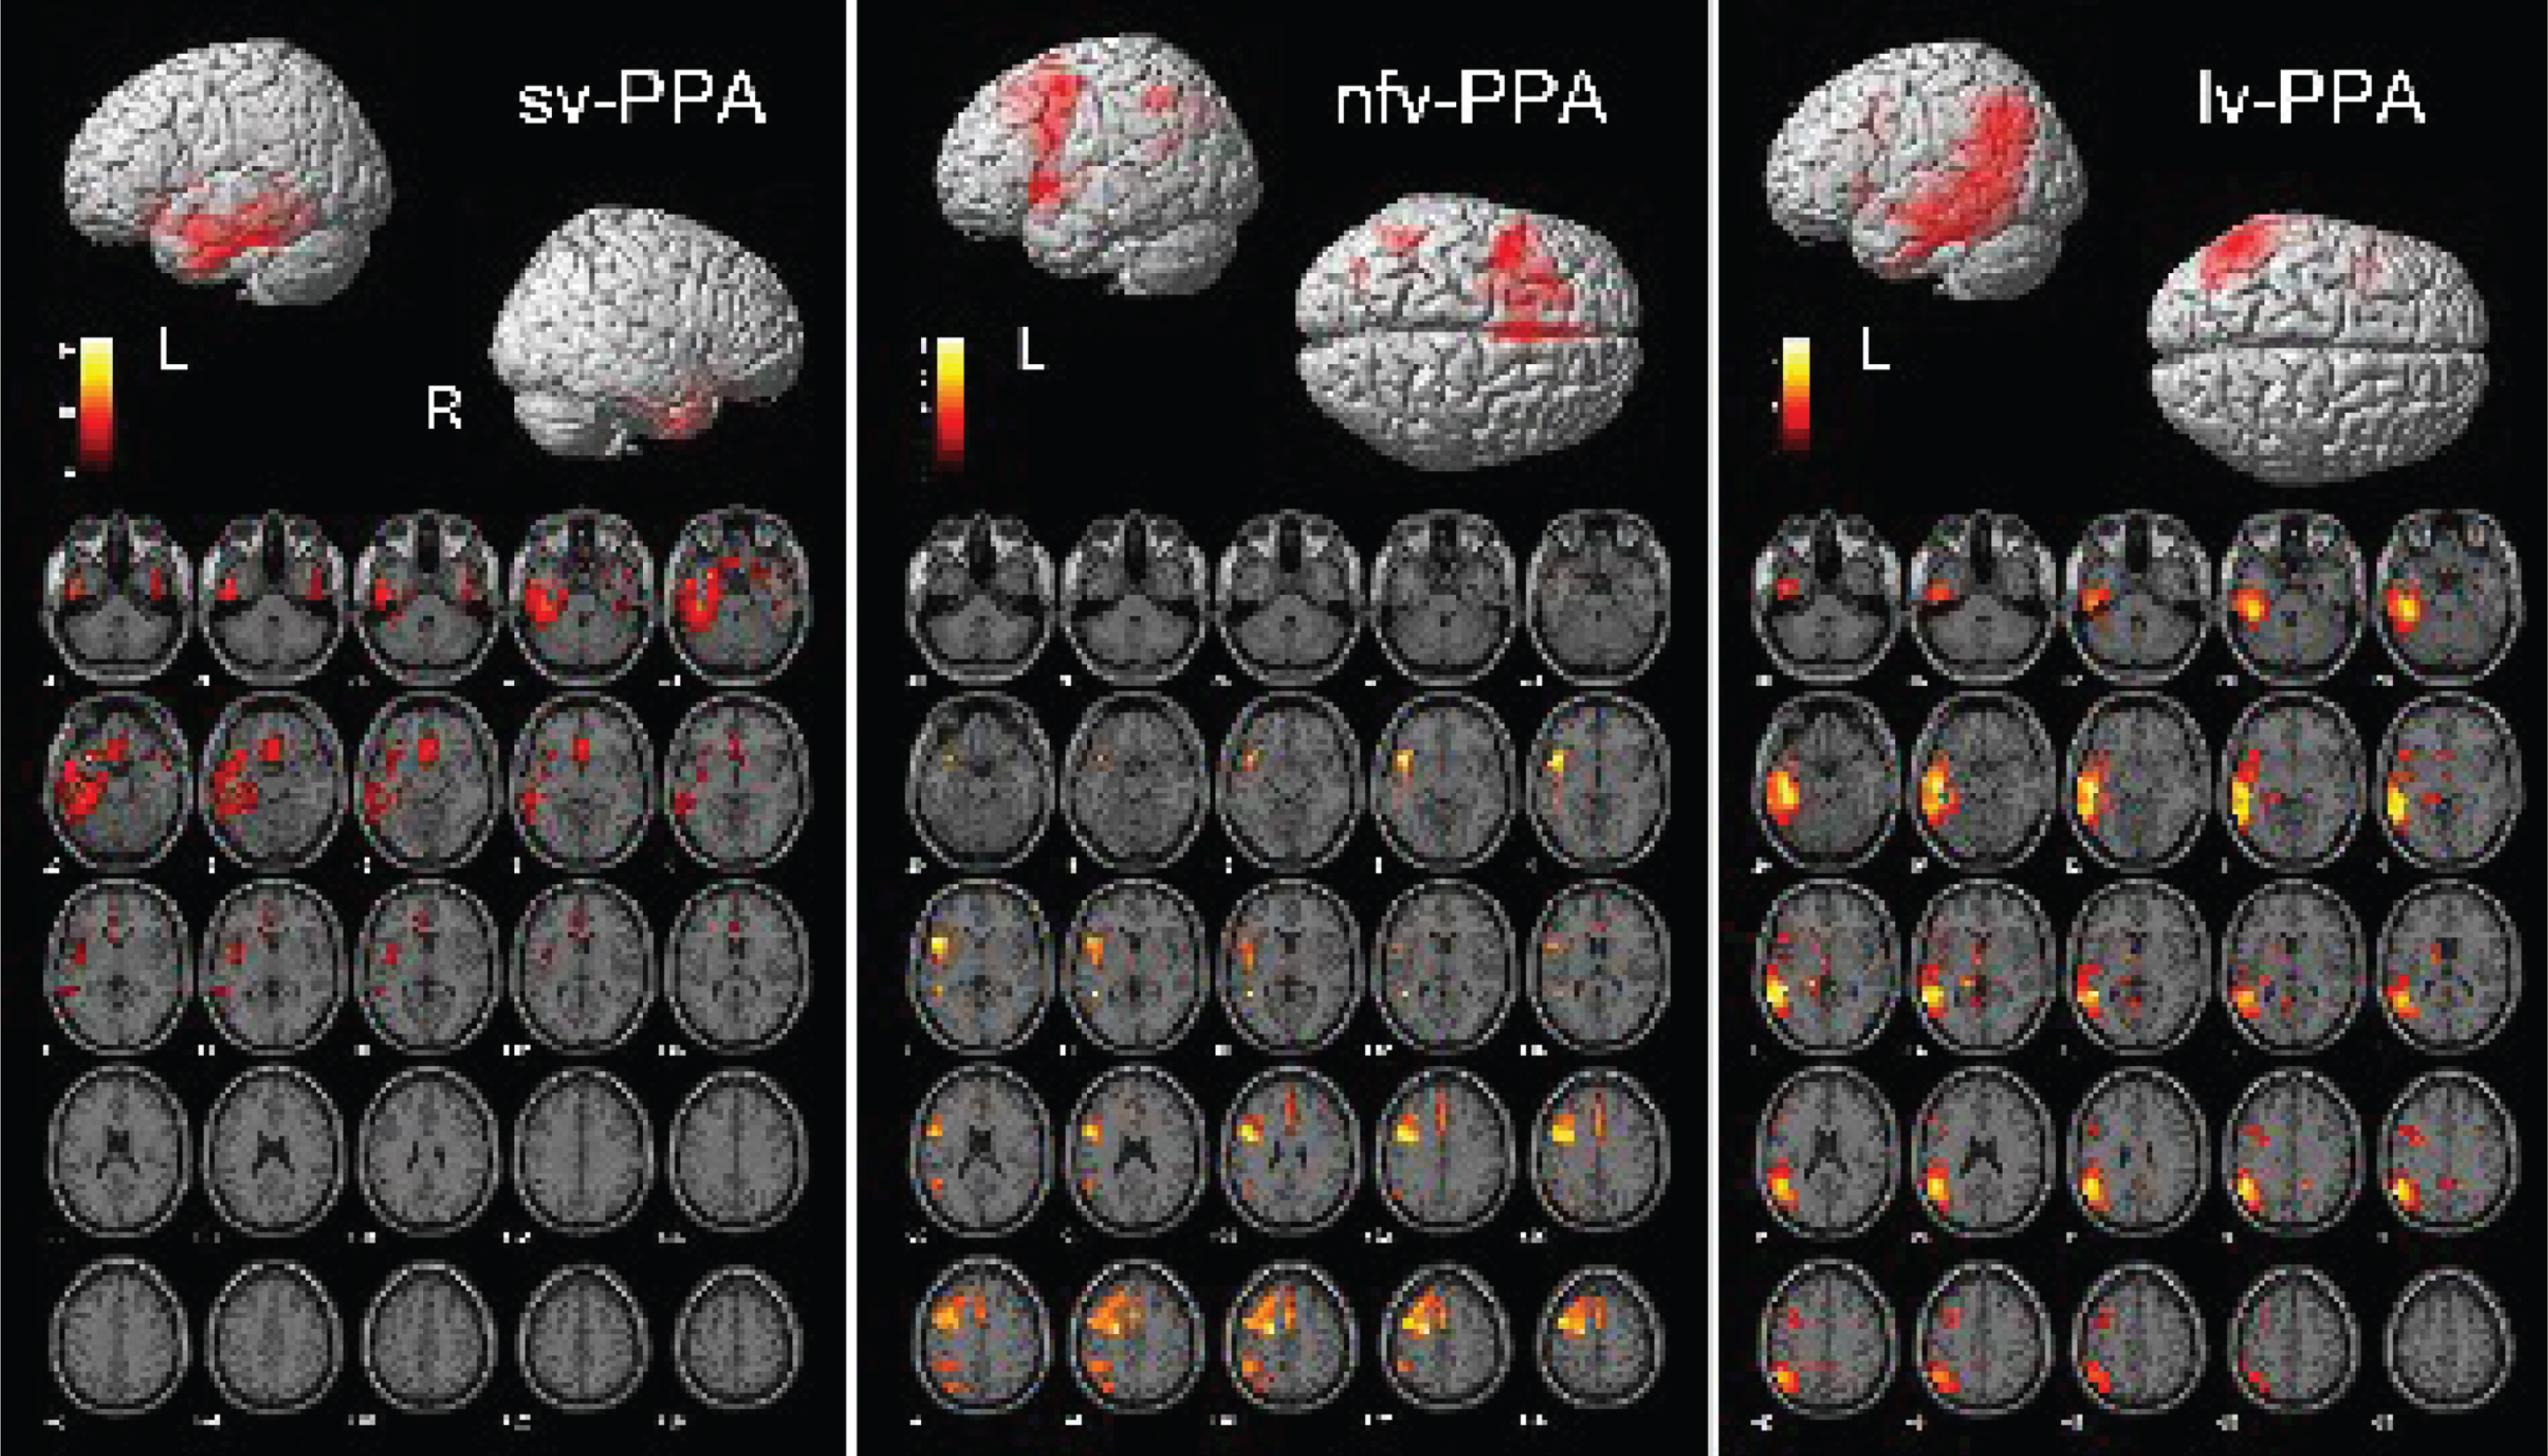 Brain regions showing significant FDG-PET hypometabolism in the primary progressive aphasia (PPA) variants. On the bottom side of each figure, the FDG-PET hypometabolic pattern resulting from the one-sample SPM group analysis is shown in axial view (x = [–40:+56]; p < 0.001 uncorrected). On the upper side of each figure, left (L) and right (R) renders are shown. See text for details of the involved brain regions.